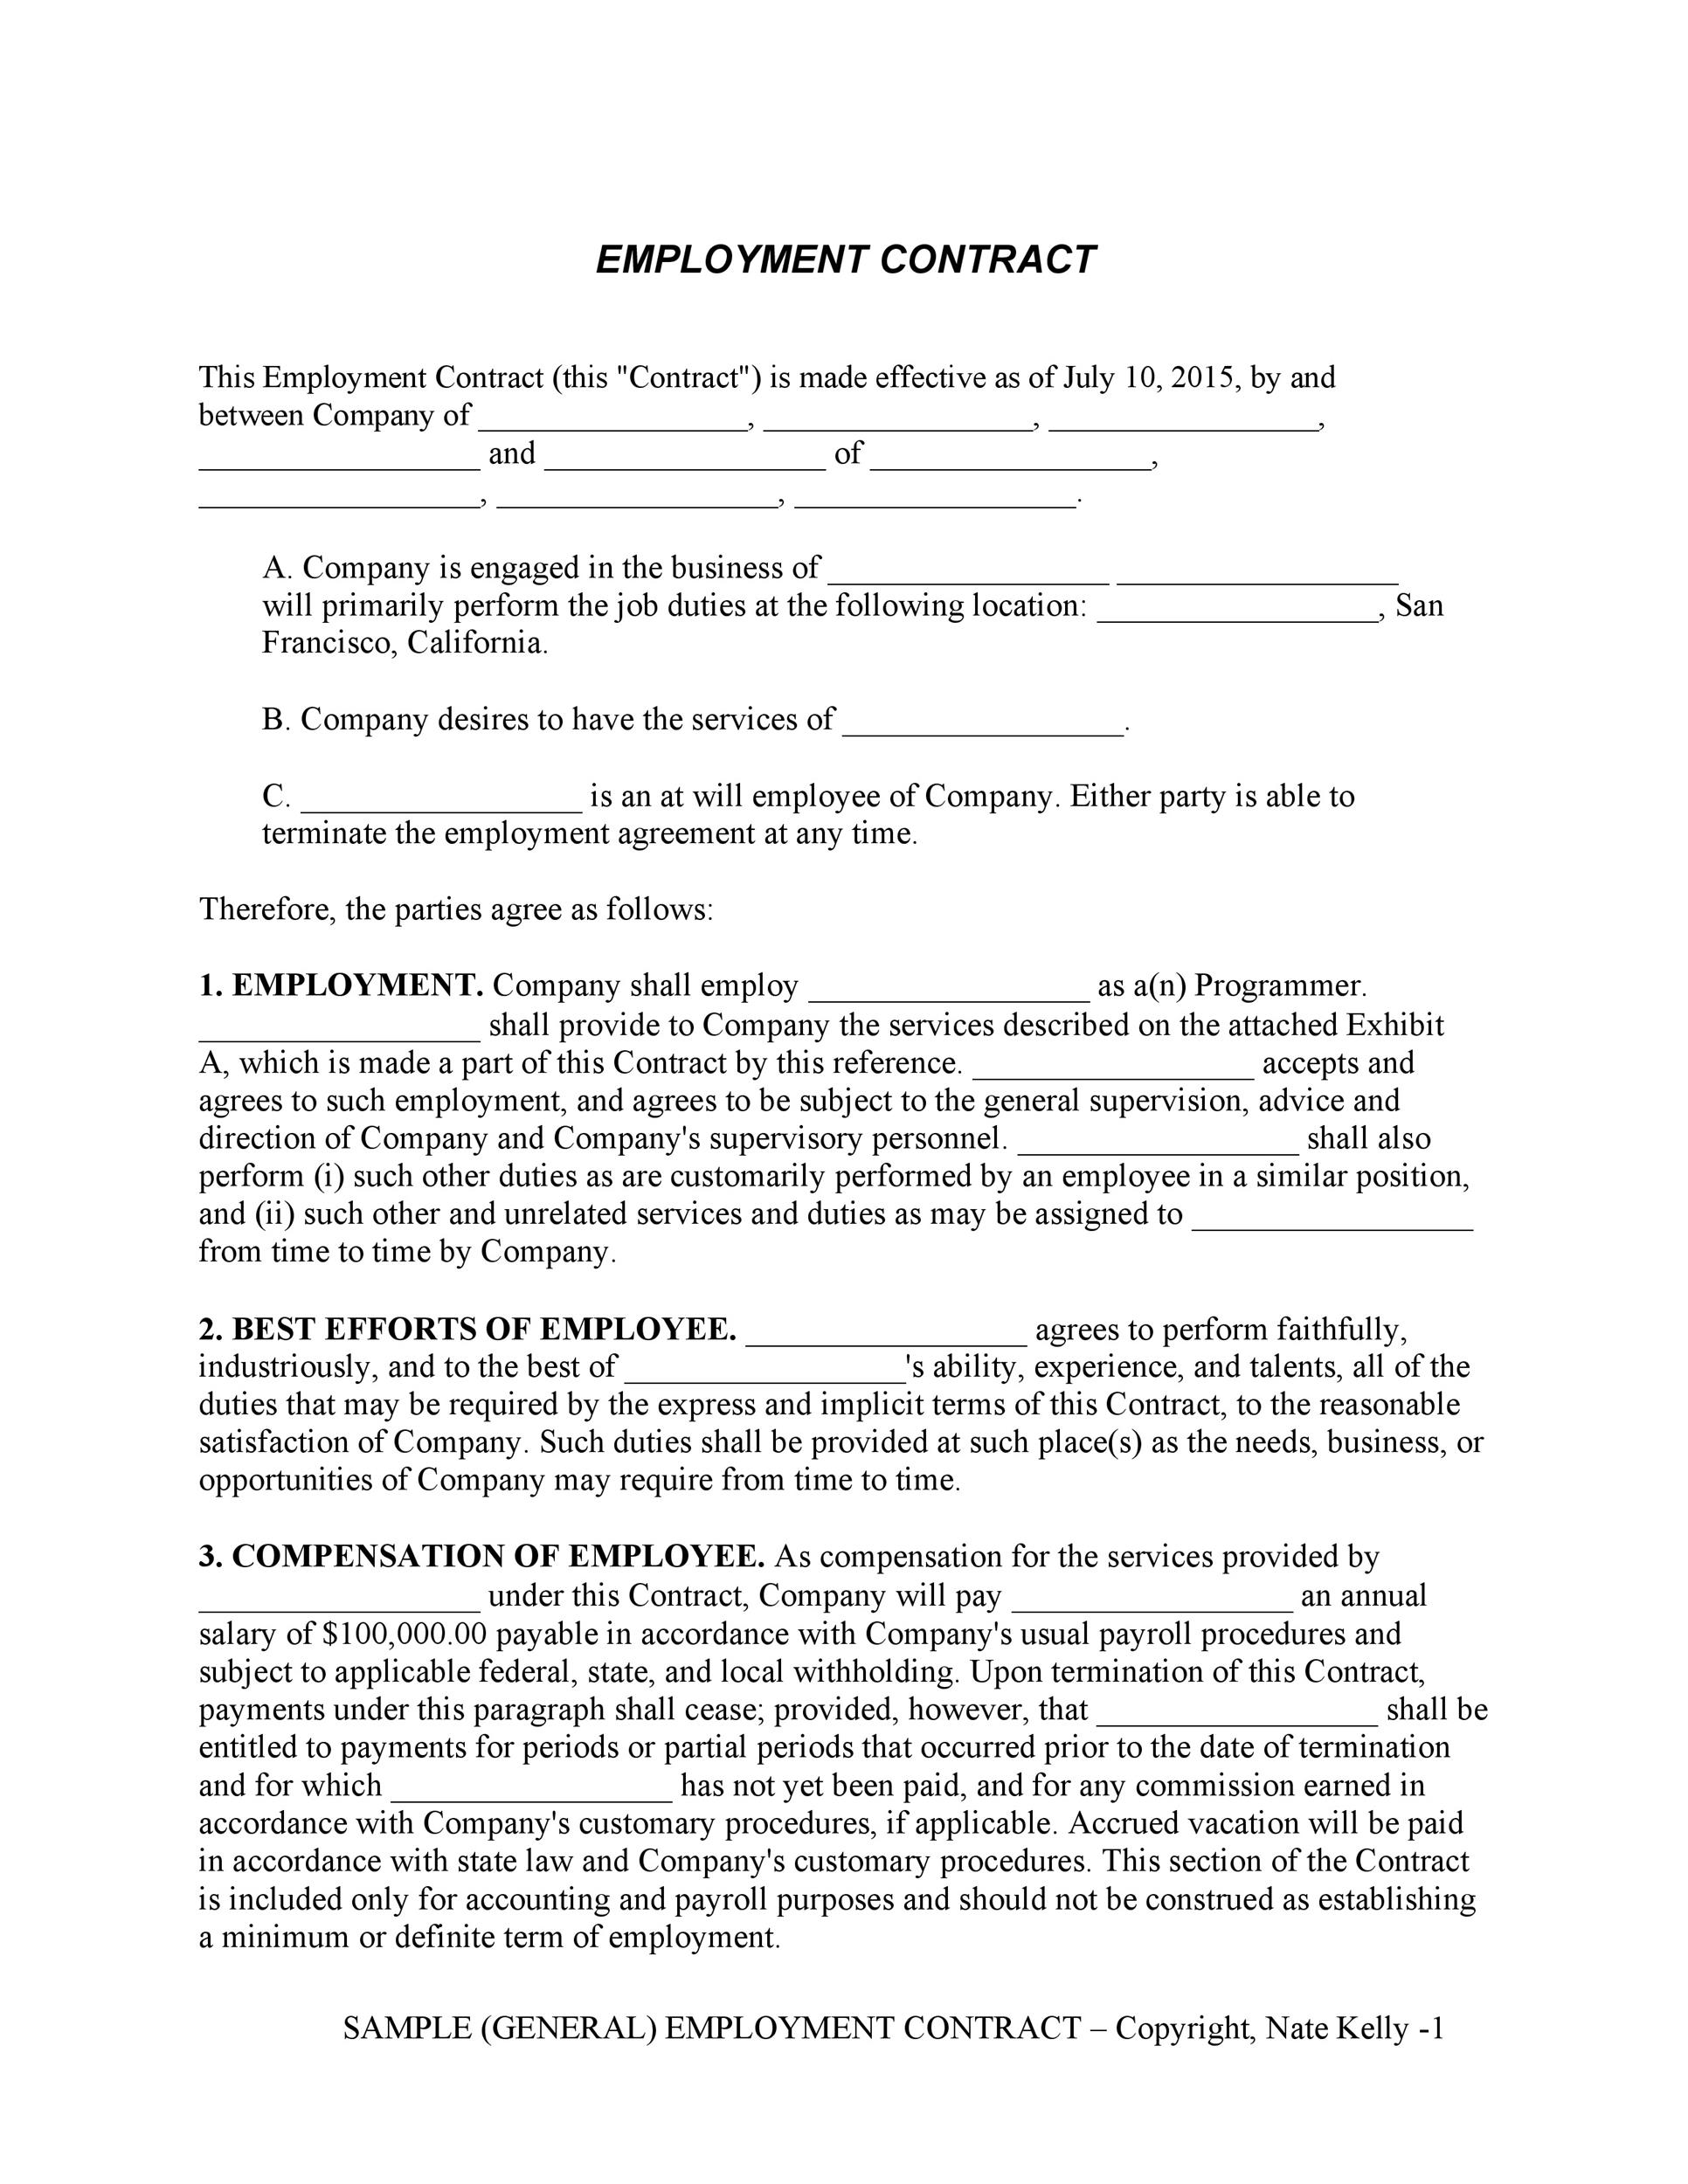 50 Ready to use Employment Contracts (Samples Templates) ᐅ